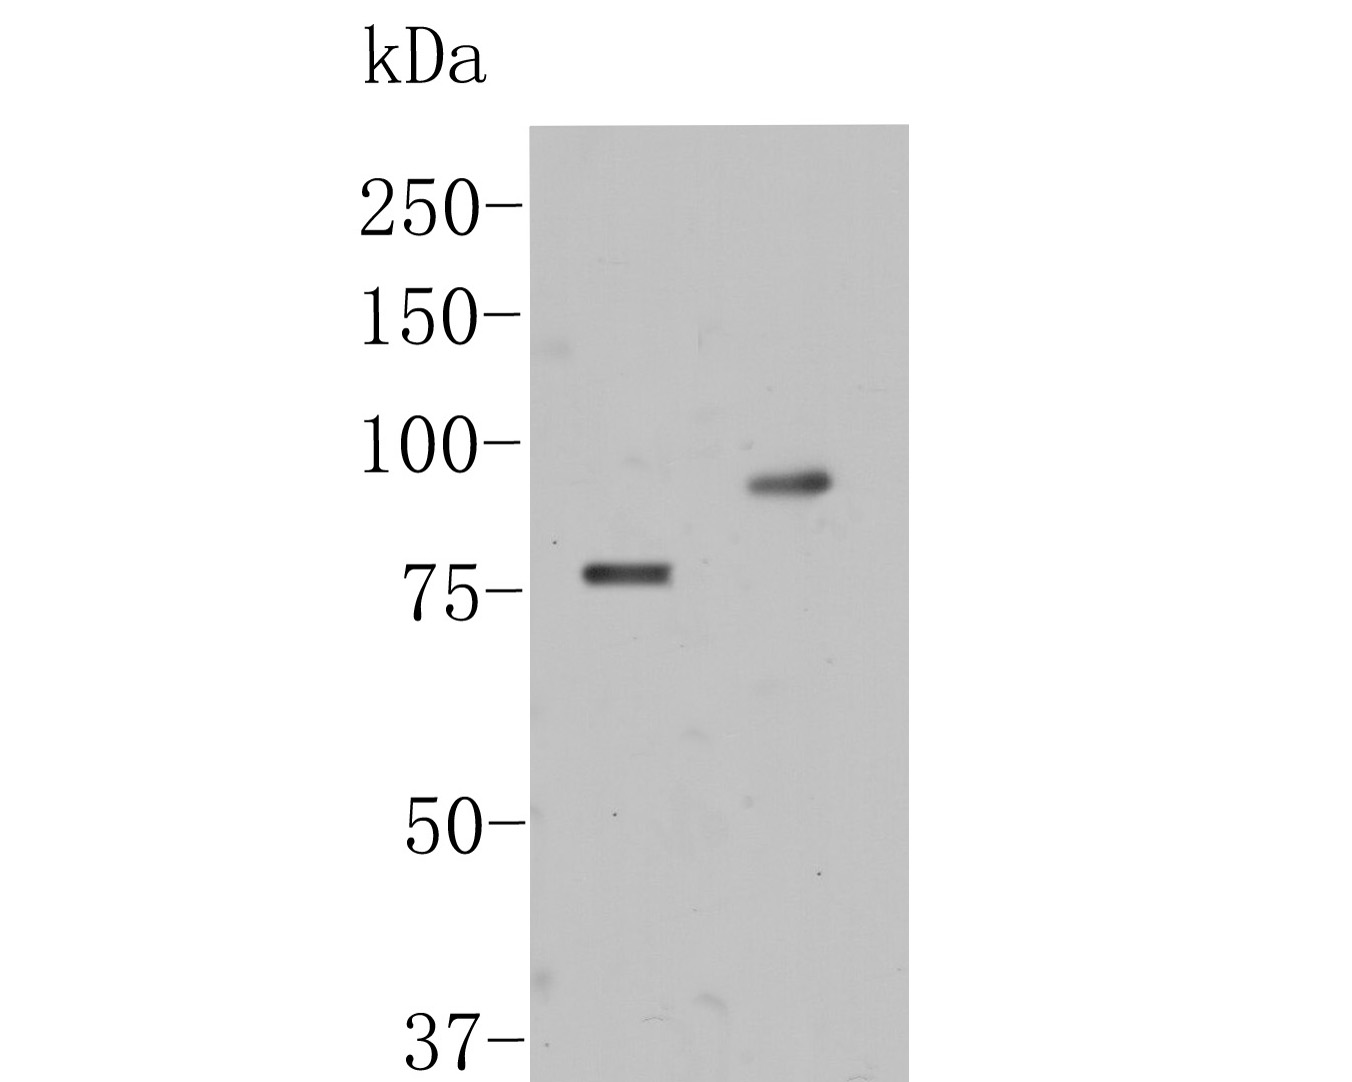 Western blot analysis of Factor XIIIa on different lysates. Proteins were transferred to a PVDF membrane and blocked with 5% BSA in PBS for 1 hour at room temperature. The primary antibody (ER1902-34, 1/500) was used in 5% BSA at room temperature for 2 hours. Goat Anti-Rabbit IgG - HRP Secondary Antibody (HA1001) at 1:5,000 dilution was used for 1 hour at room temperature.<br />
Positive control: <br />
Lane 1: human placenta tissue lysate<br />
Lane 2: human liver tissue lysate